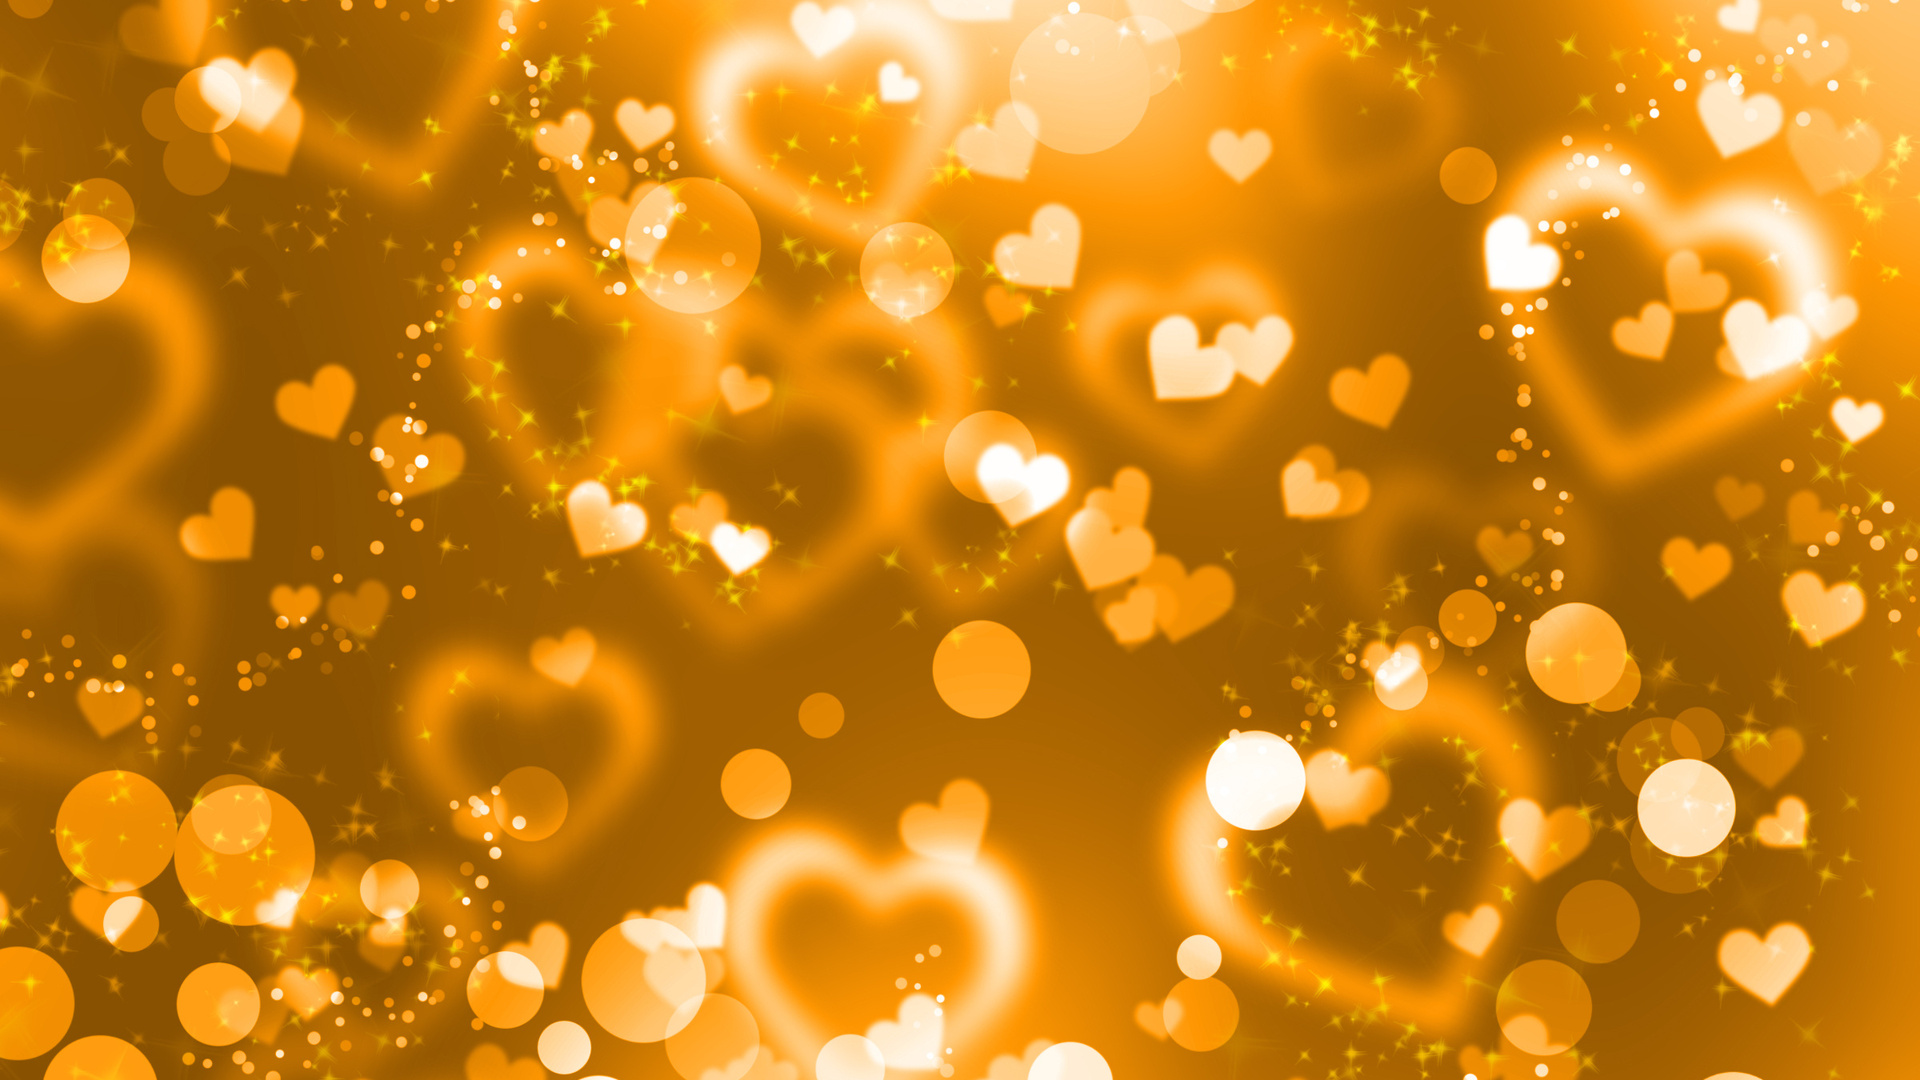 Solid Gold Background wallpaper Solid Gold Background hd wallpaper